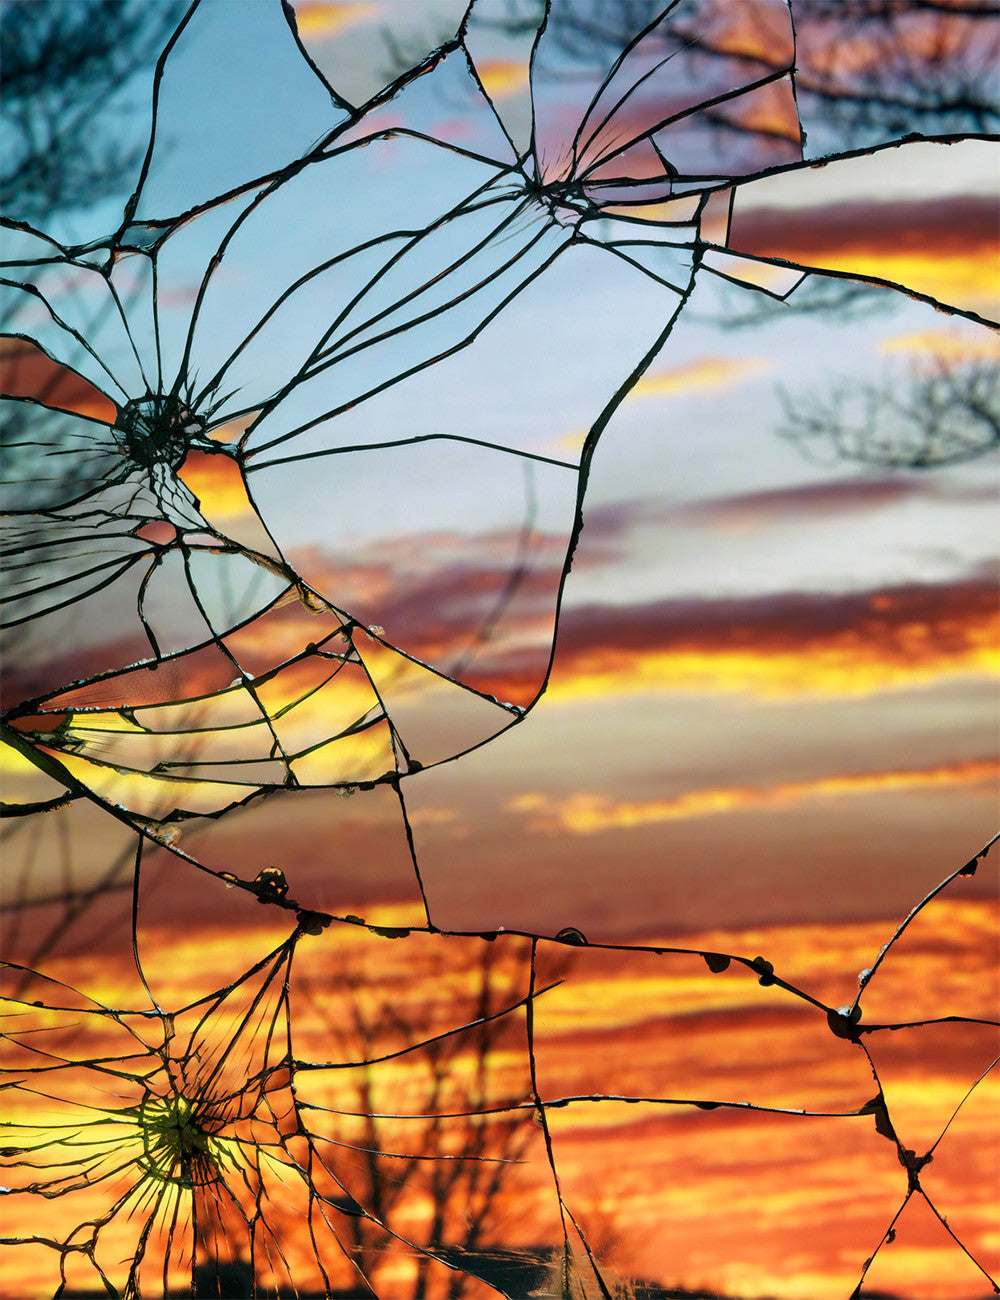 Photography:  Sunset through Fragmented Glass